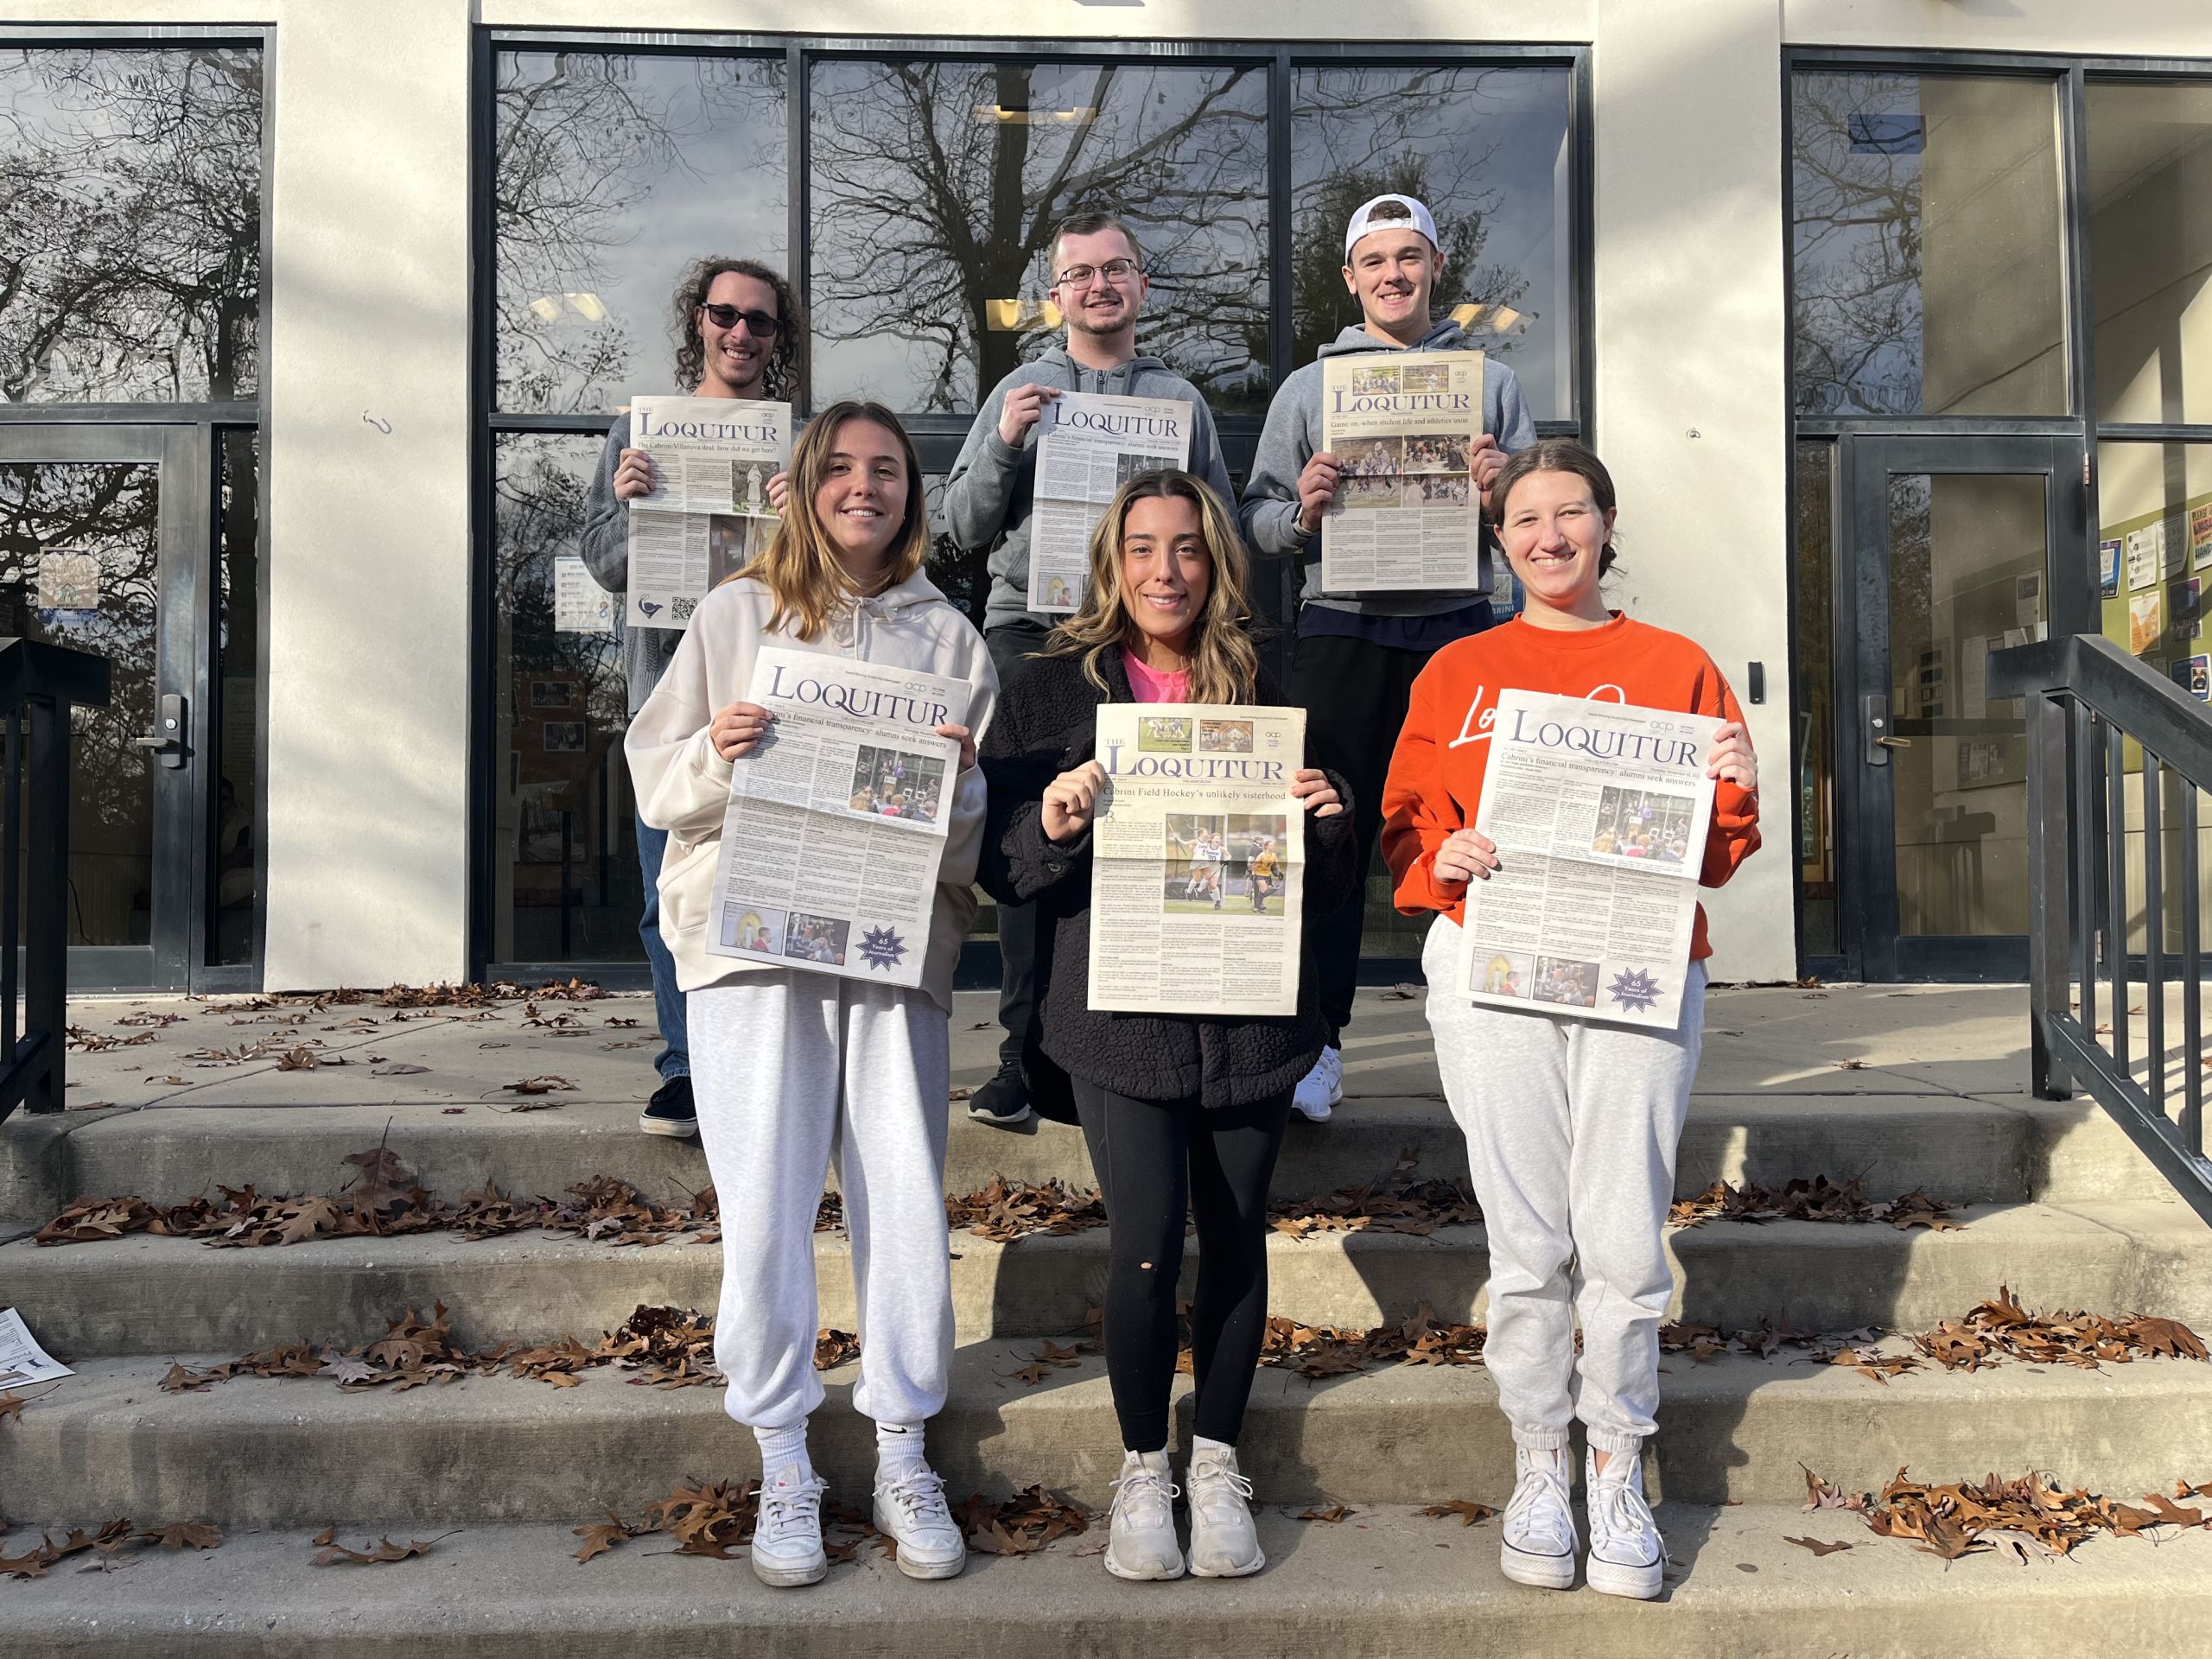 The Loquitur editorial staff: (Back row left to right) Andrew Stovenour, Chris Perri, Jason Fridge. (Front row left to right: Paige Bowman, Samantha Taddei, Leigha Sepers. Photo by Emma Regulski. 